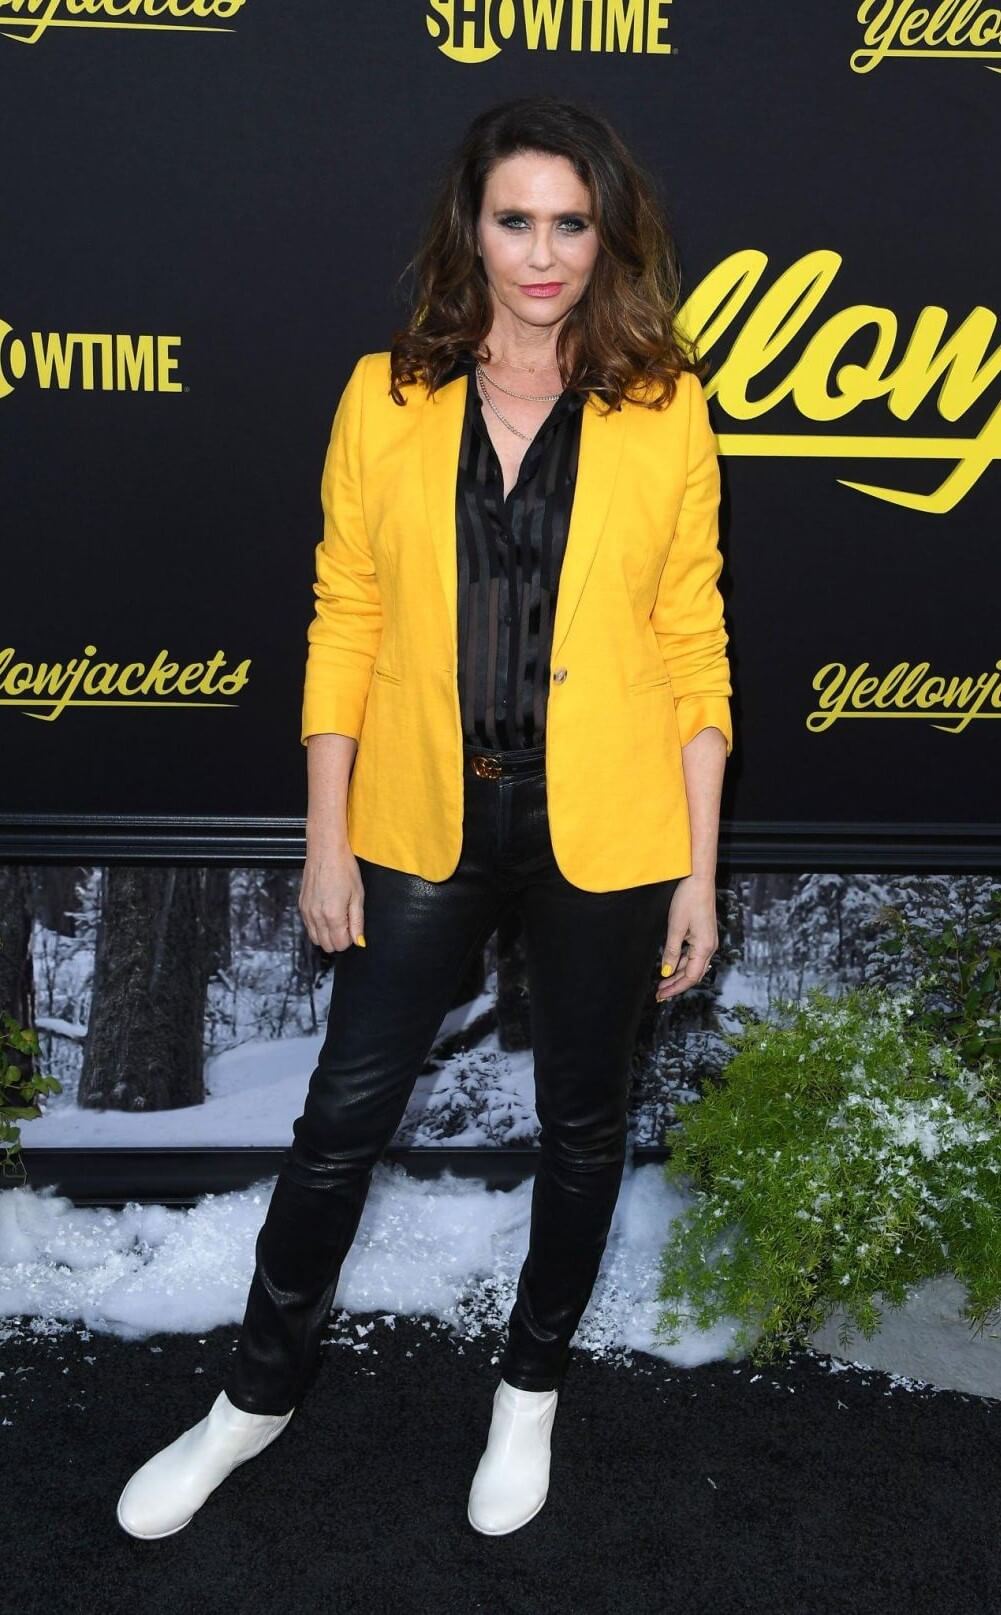 Amy Landecker In Black Shiny Shirt With Leather Pants At “Yellowjackets” Season 2 Premiere in Hollywood